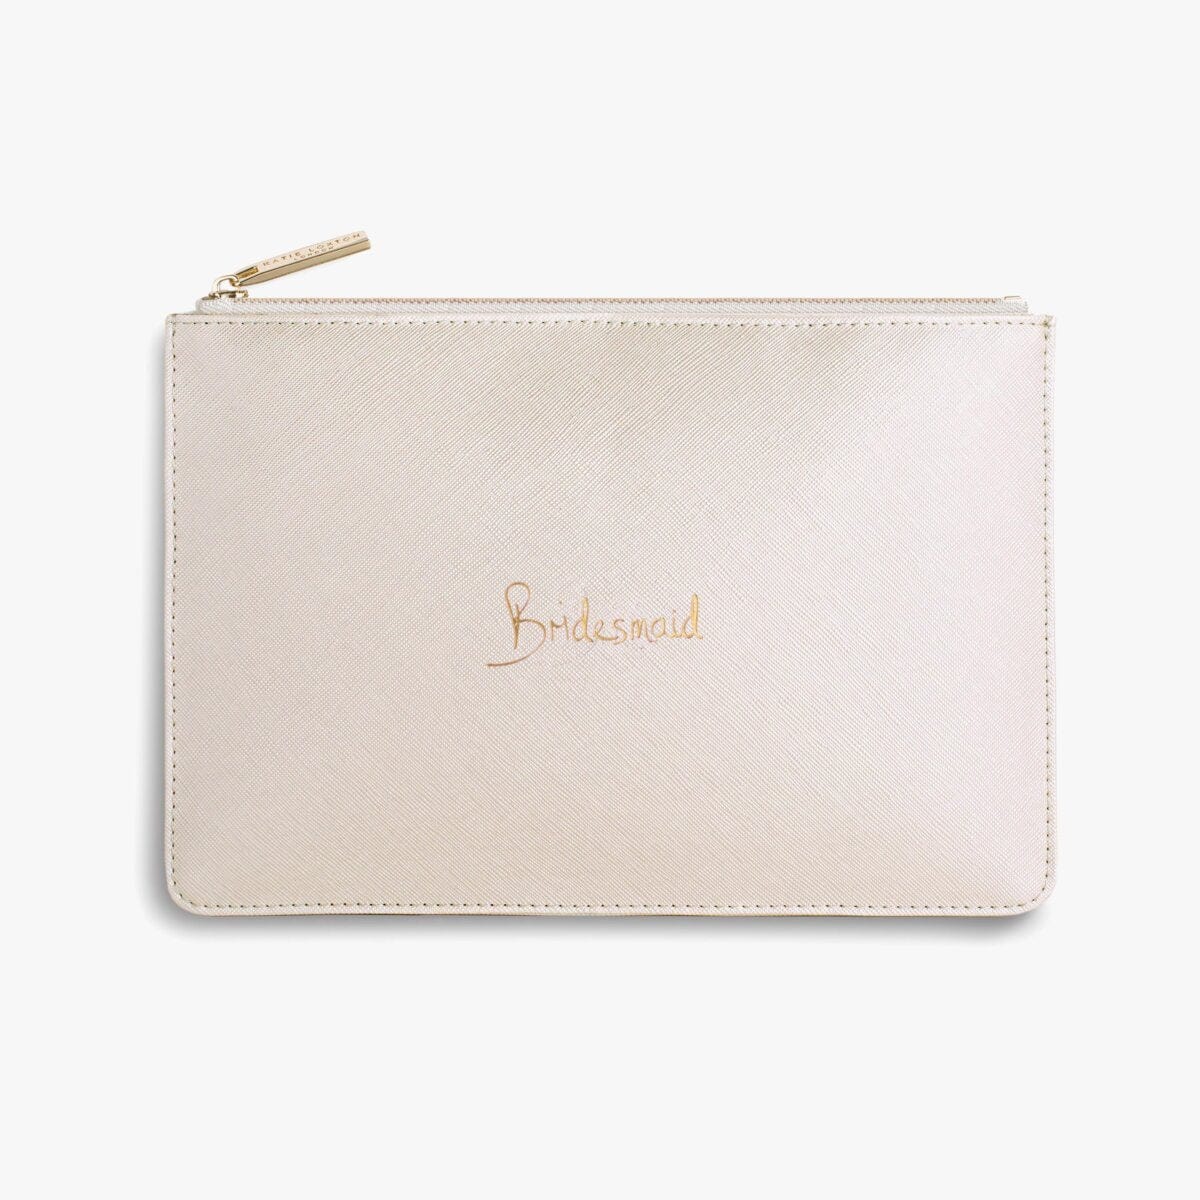 Katie Loxton Perfect Pouch Katie Loxton Perfect Pouch - Bridesmaid - Pearlescent